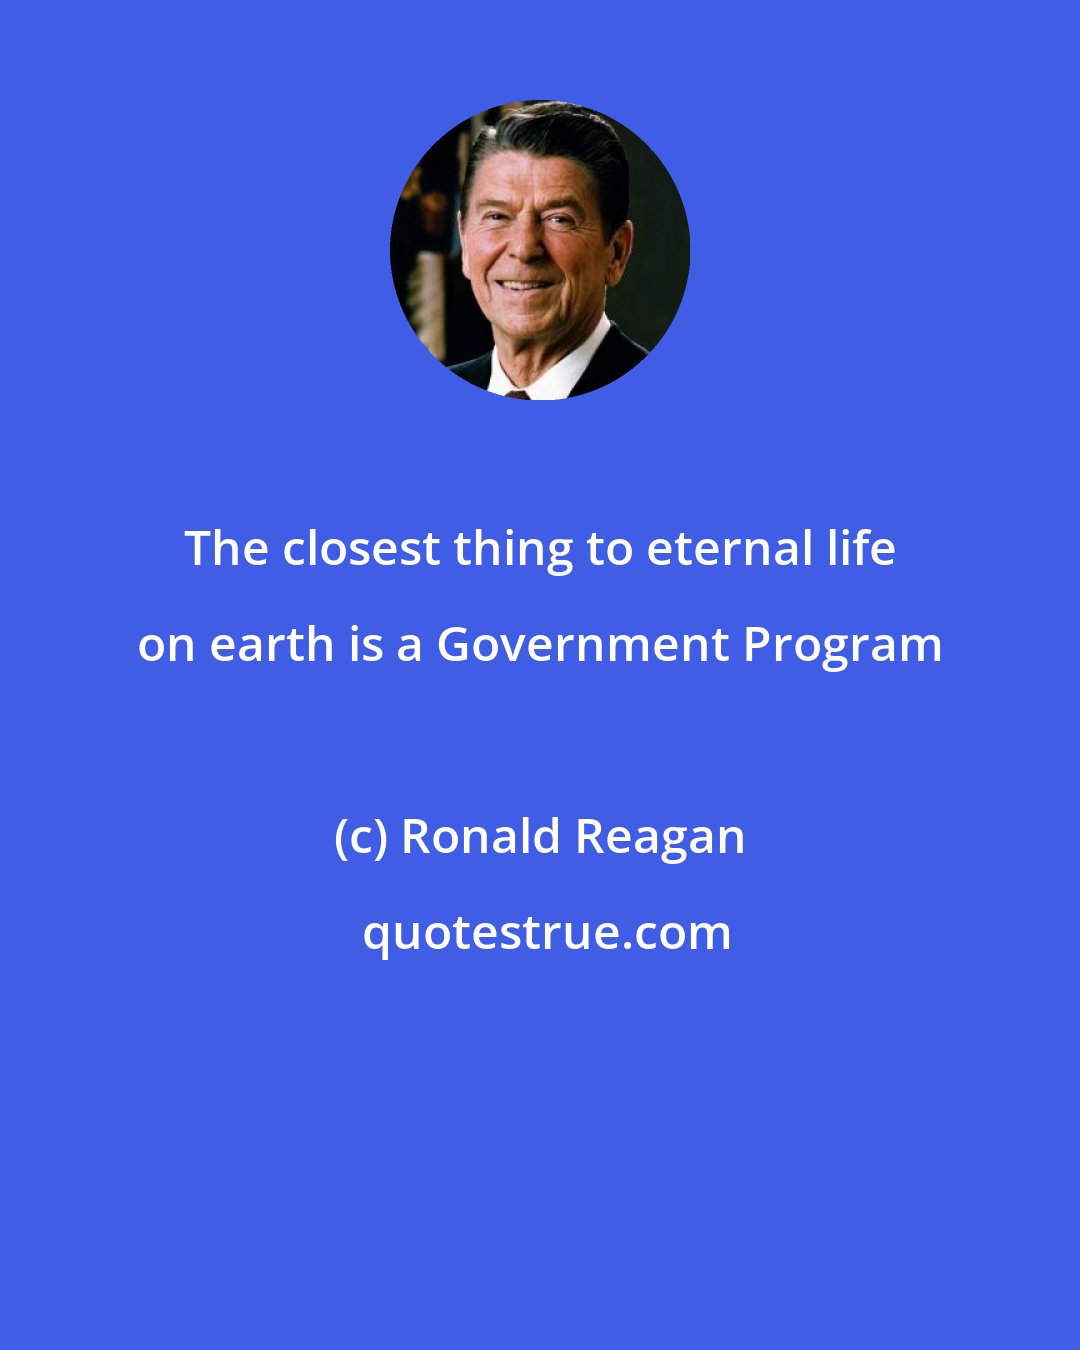 Ronald Reagan: The closest thing to eternal life on earth is a Government Program